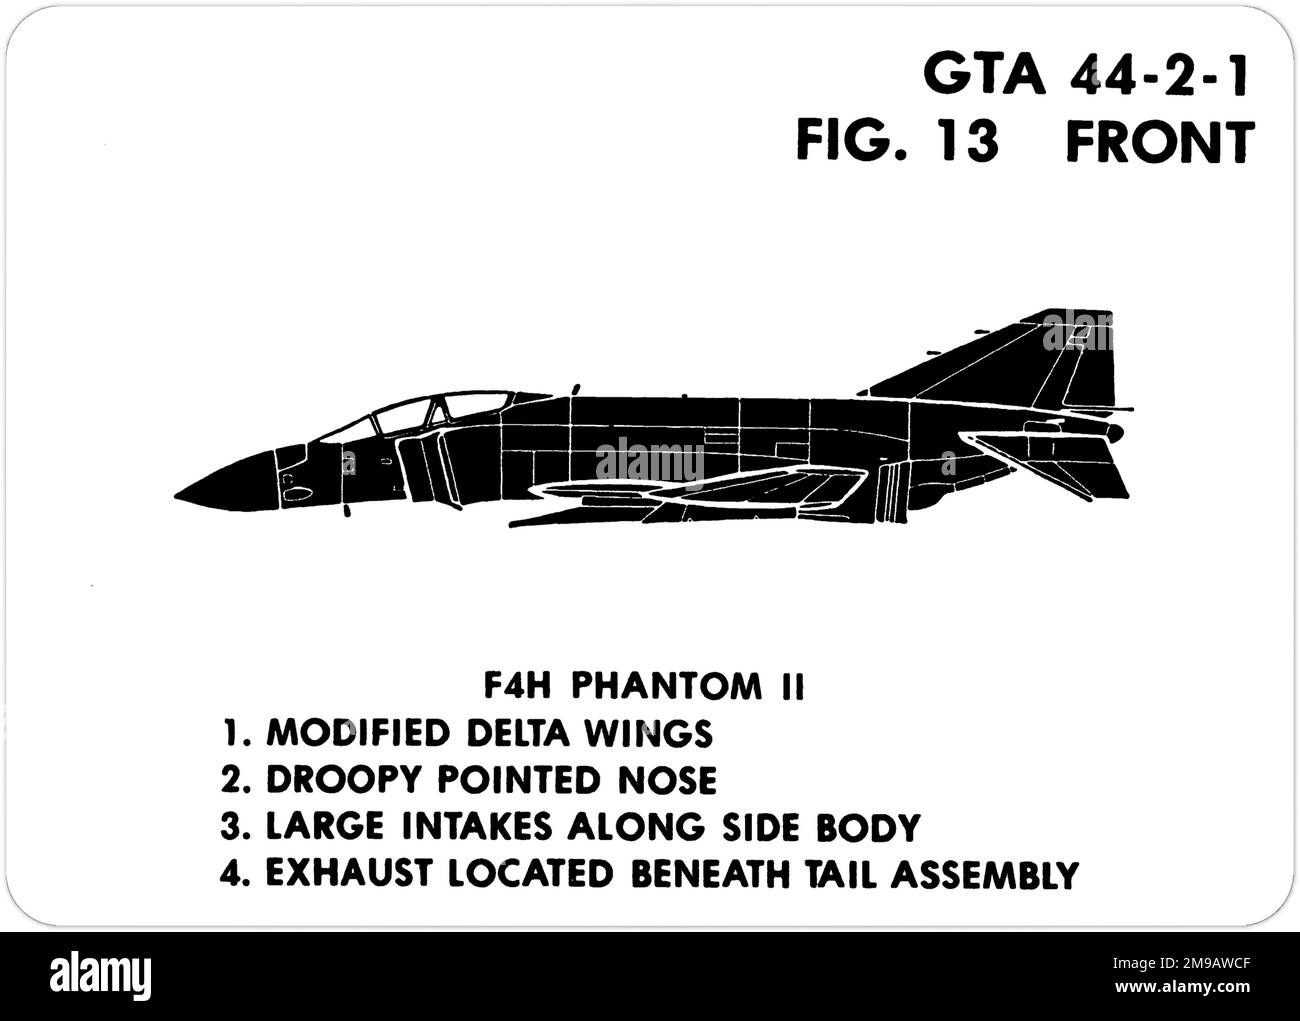 McDonnell F-4B Phantom II (F4H from 1959 to 1962). This is one of the series of Graphics Training Aids (GTA) used by the United States Army to train their personnel to recognize friendly and hostile aircraft. This particular set, GTA 44-2-1, was issued in July1977. The set features aircraft from: Canada, Italy, United Kingdom, United States, and the USSR. Stock Photo